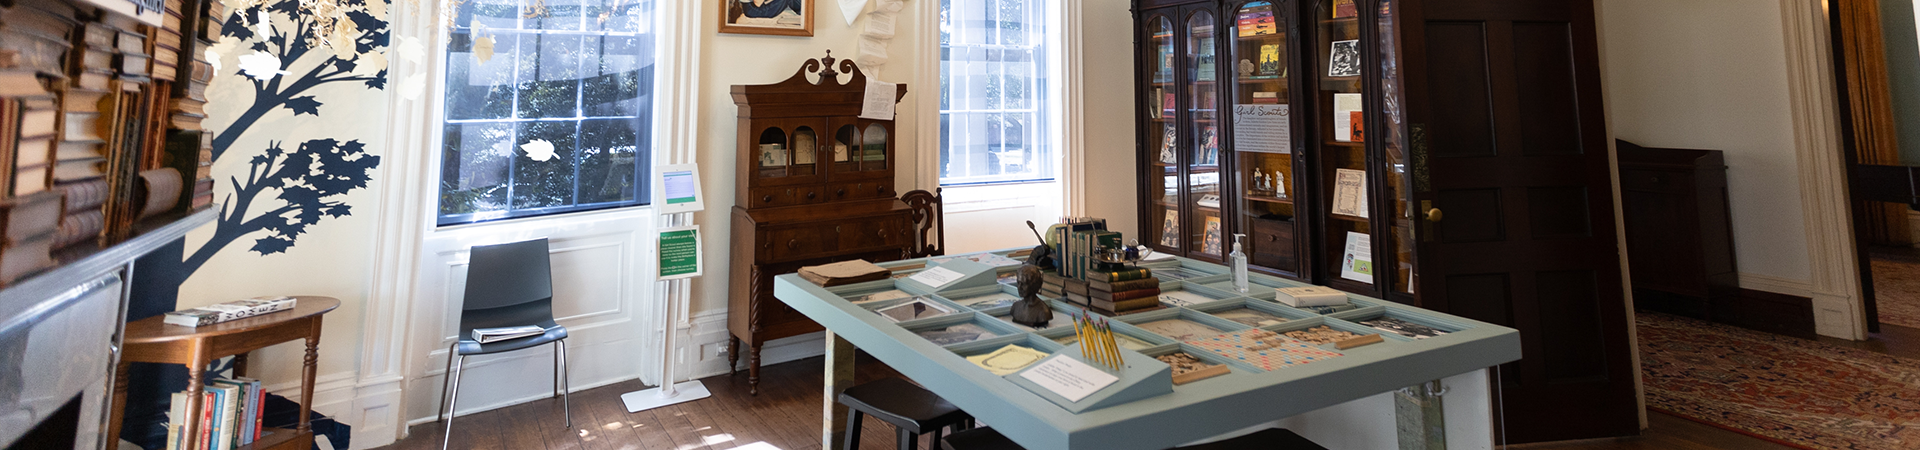  The library inside the Juliette Gordon Low Birthplace with educational games on display in the middle. 